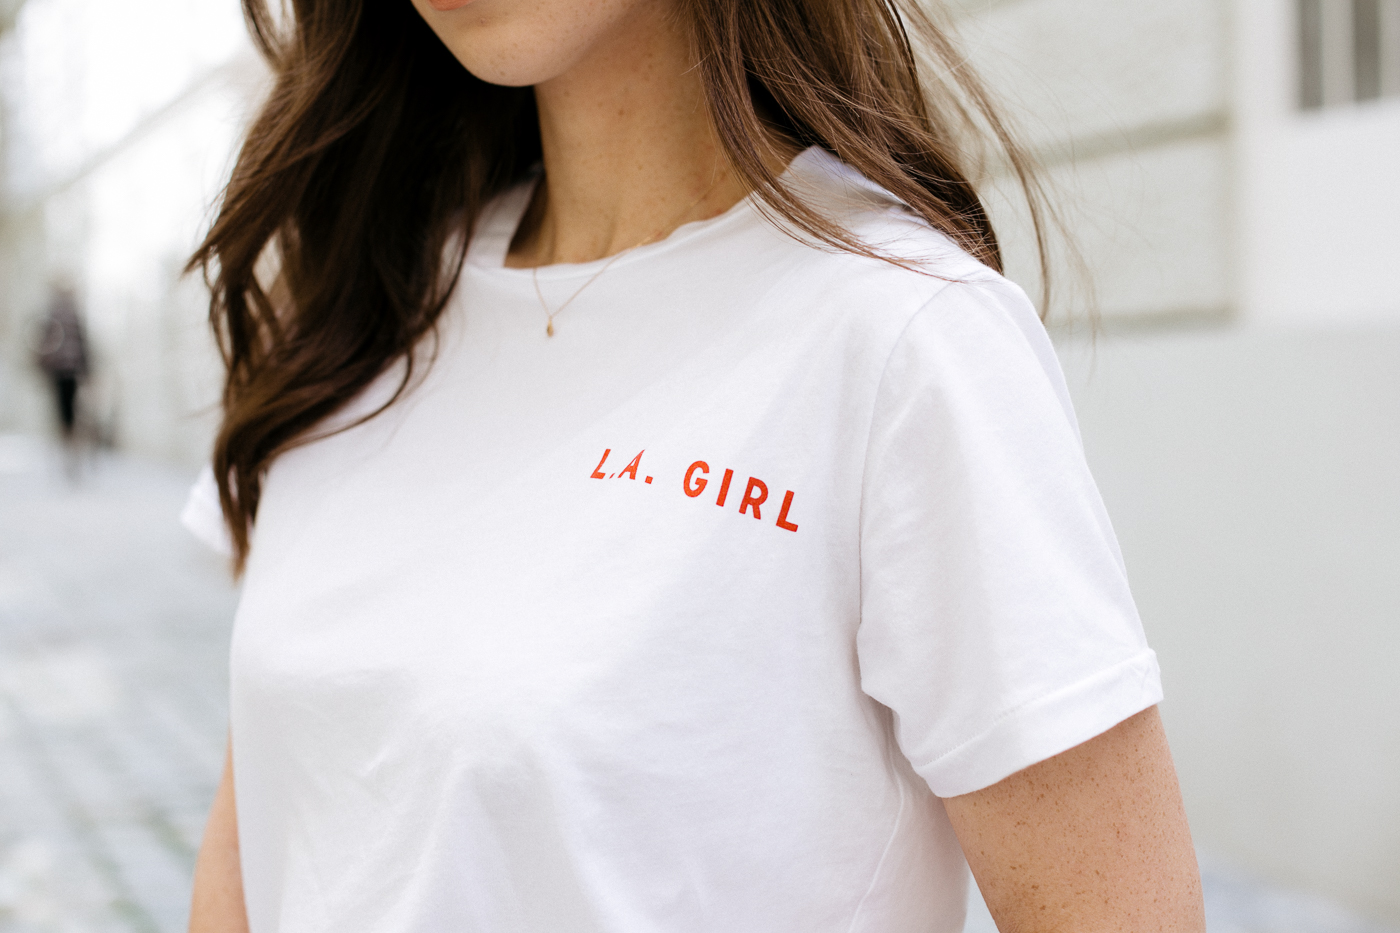 OUTFIT: L.A. girl